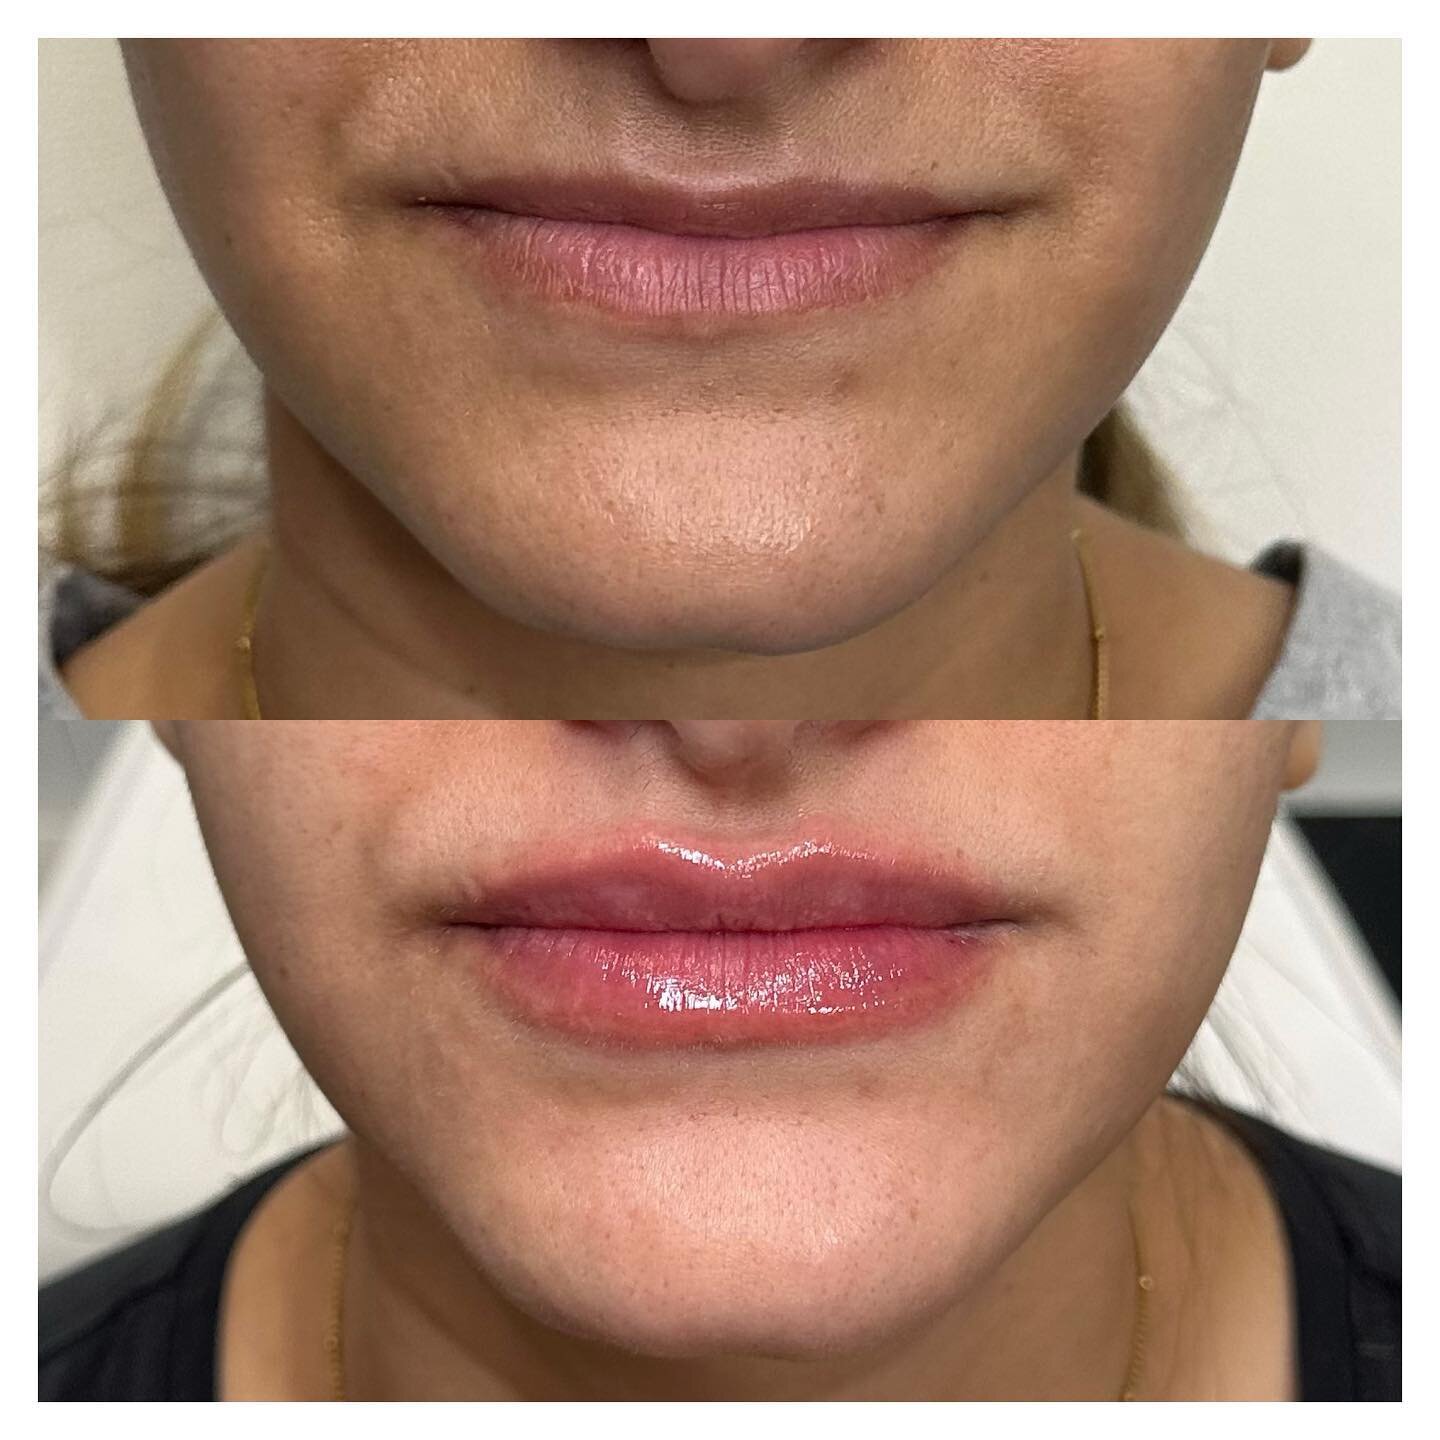 💉Treatment: LIP FILLER 
🧐Purpose: Add volume &amp; a more hydrated look
💰Cost: $650+
🧬Product: Hyluronic Acid 
⏰Appointment time: 60-90 mins
🥰Comfort: topical numbing or mucosal block ($25 charge for mucosal block)
🤕Downtime: bruising and swell